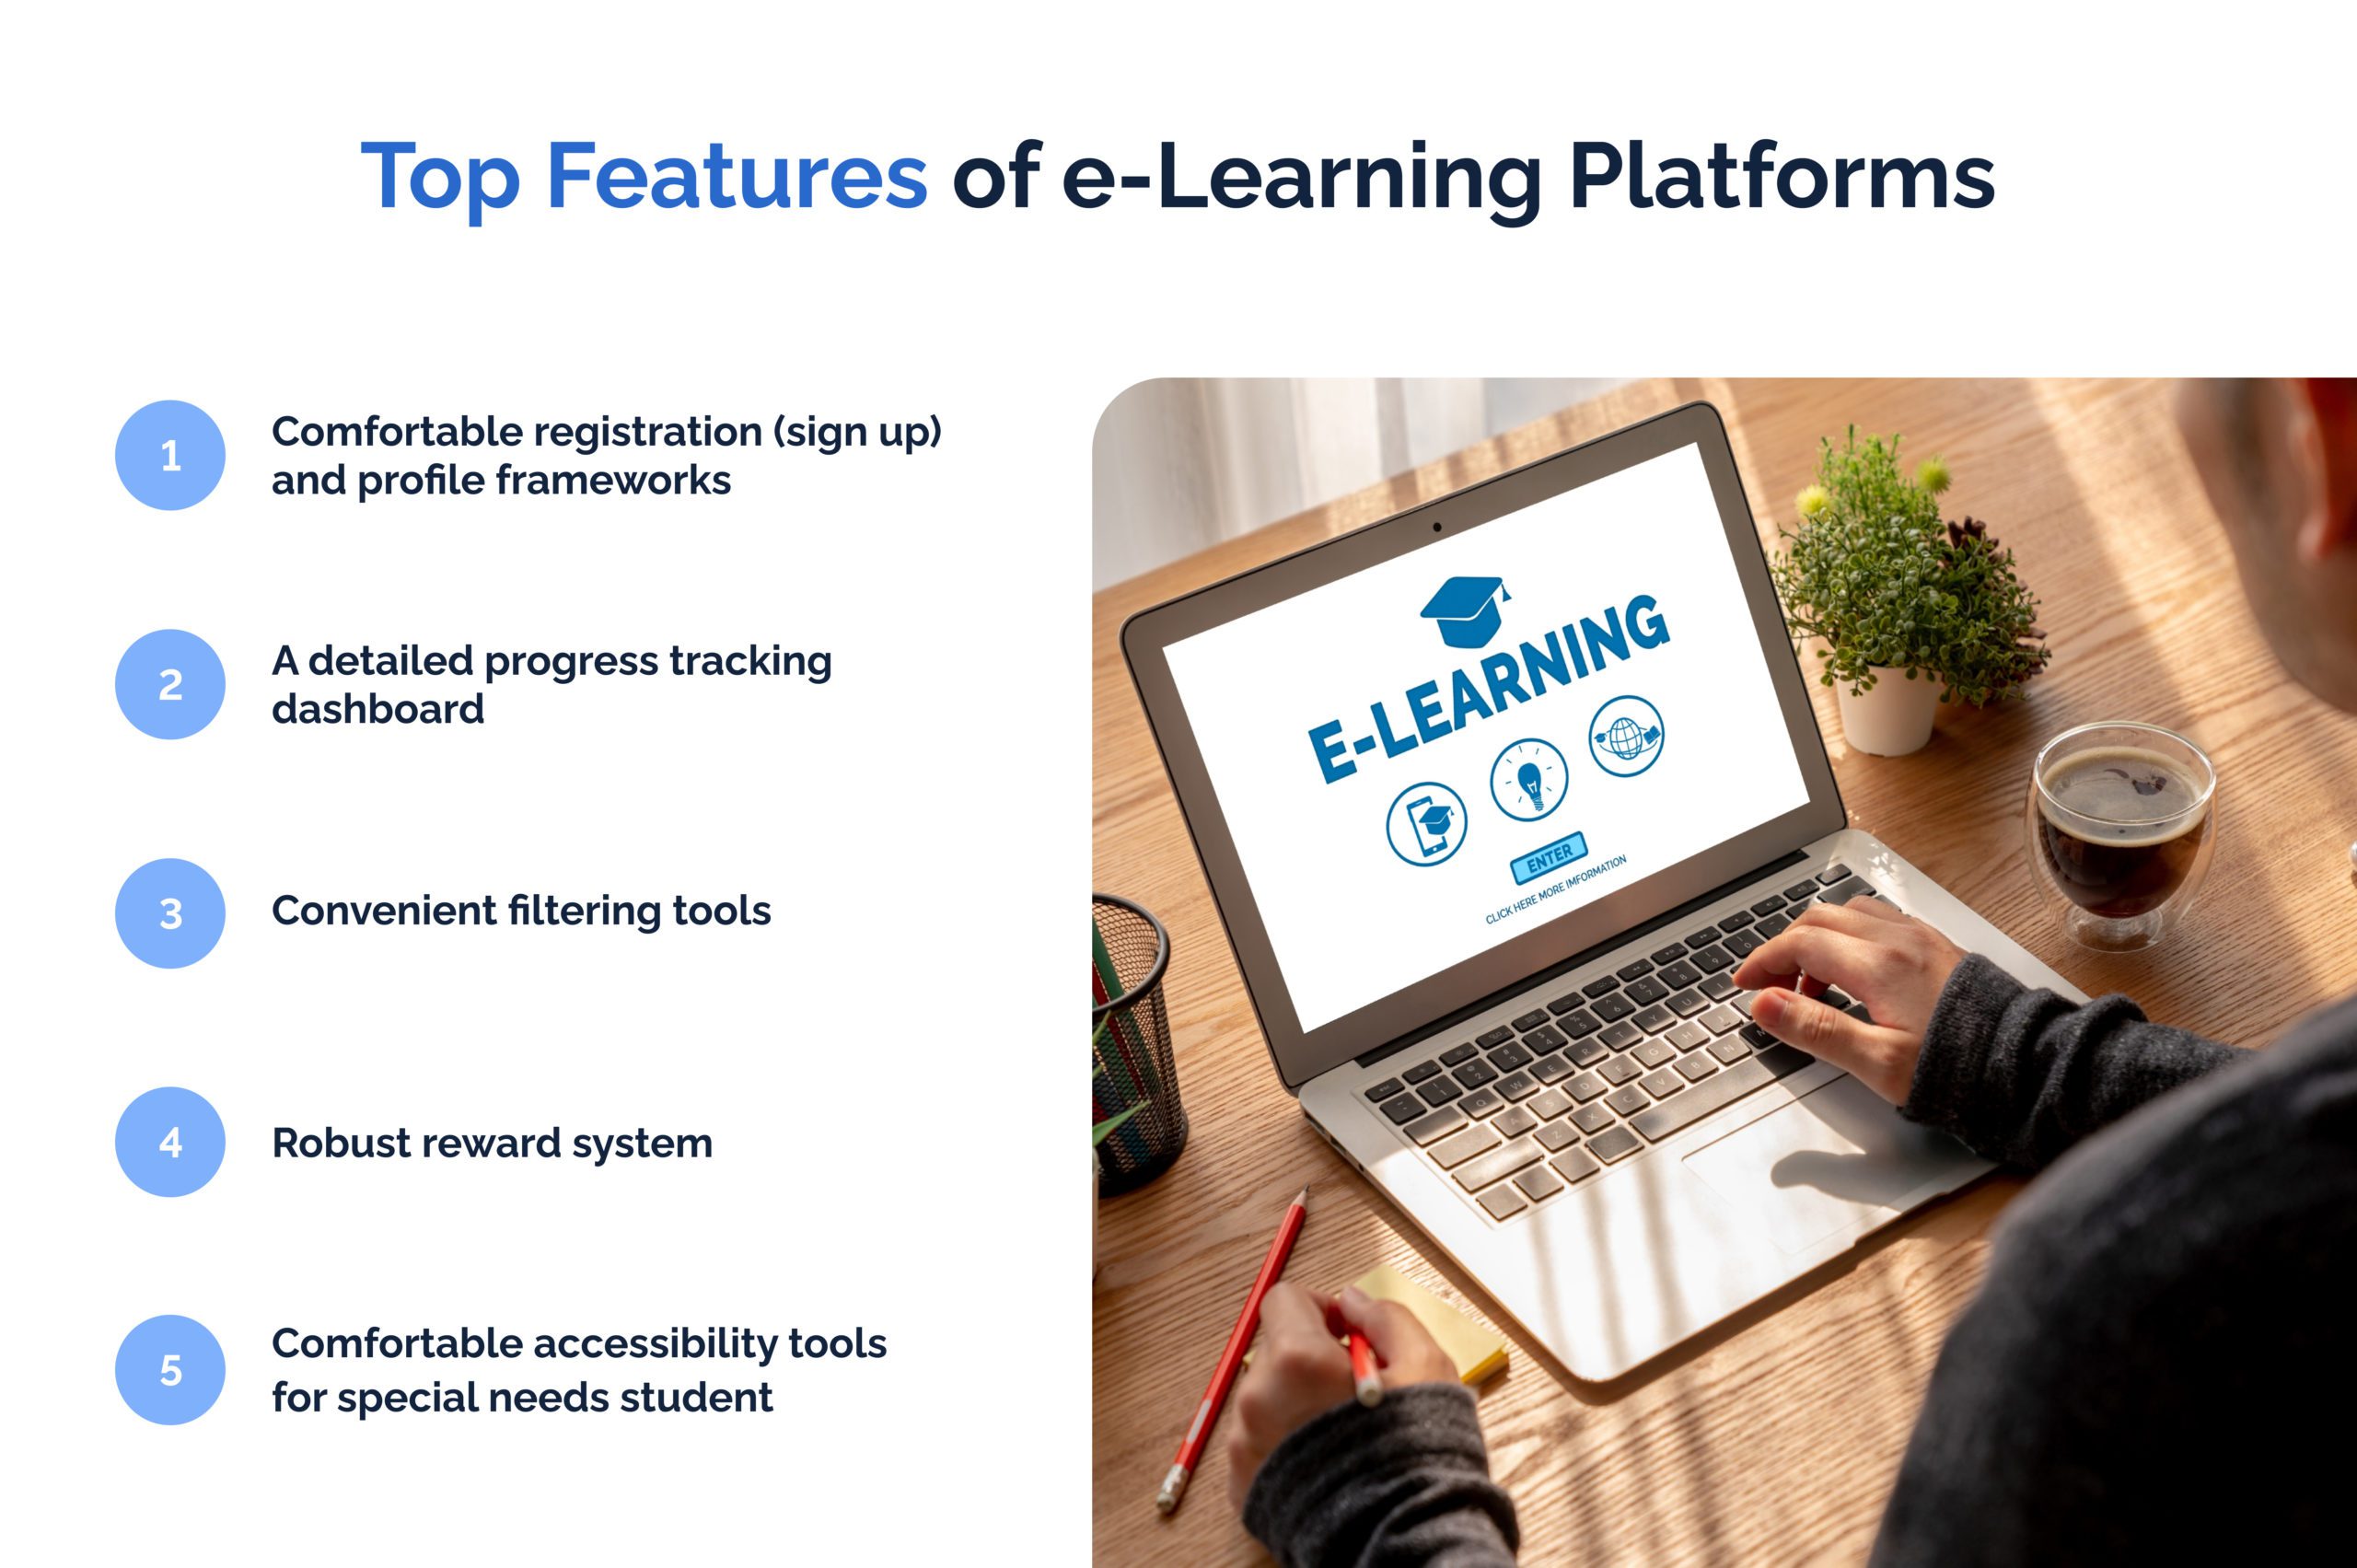 Top features of e-Learning platforms